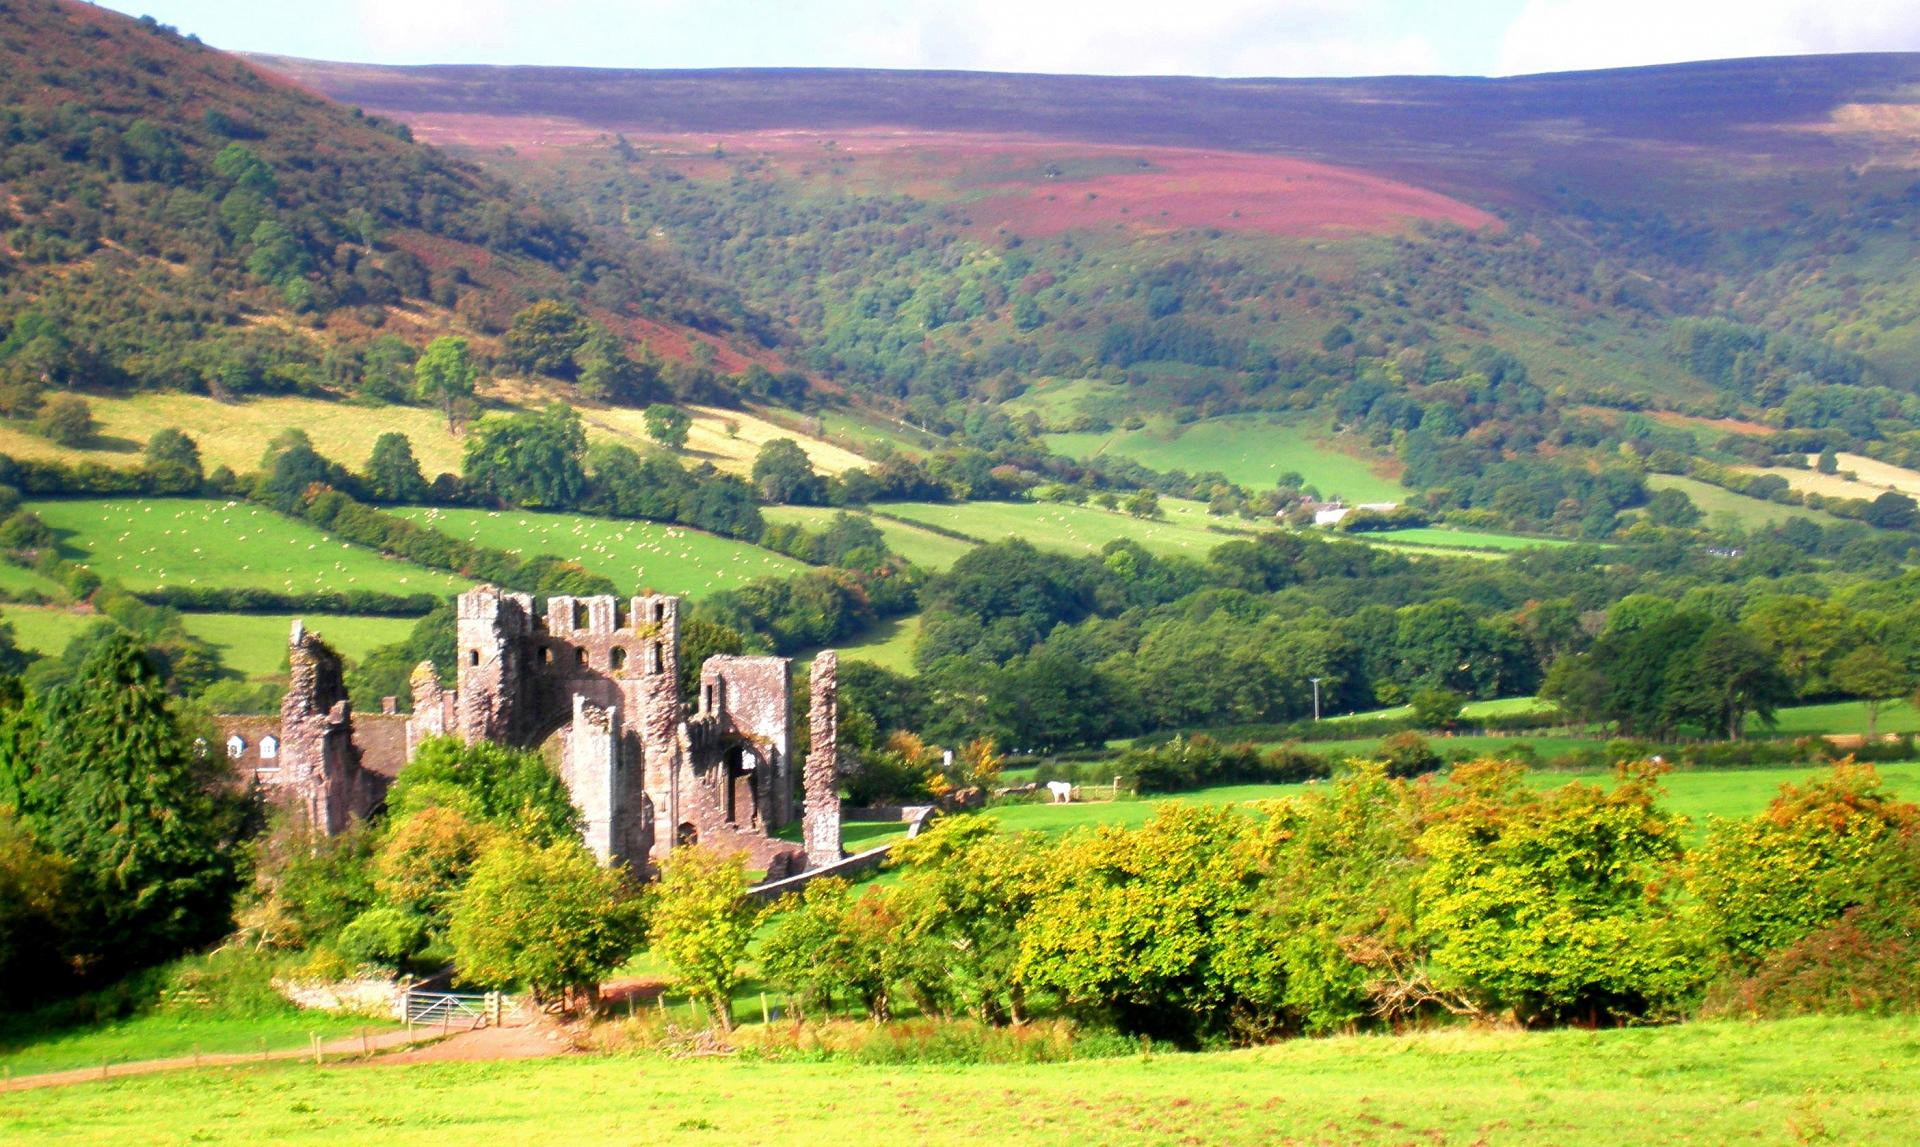 Llanthony Priory nestled in the Black Mountains